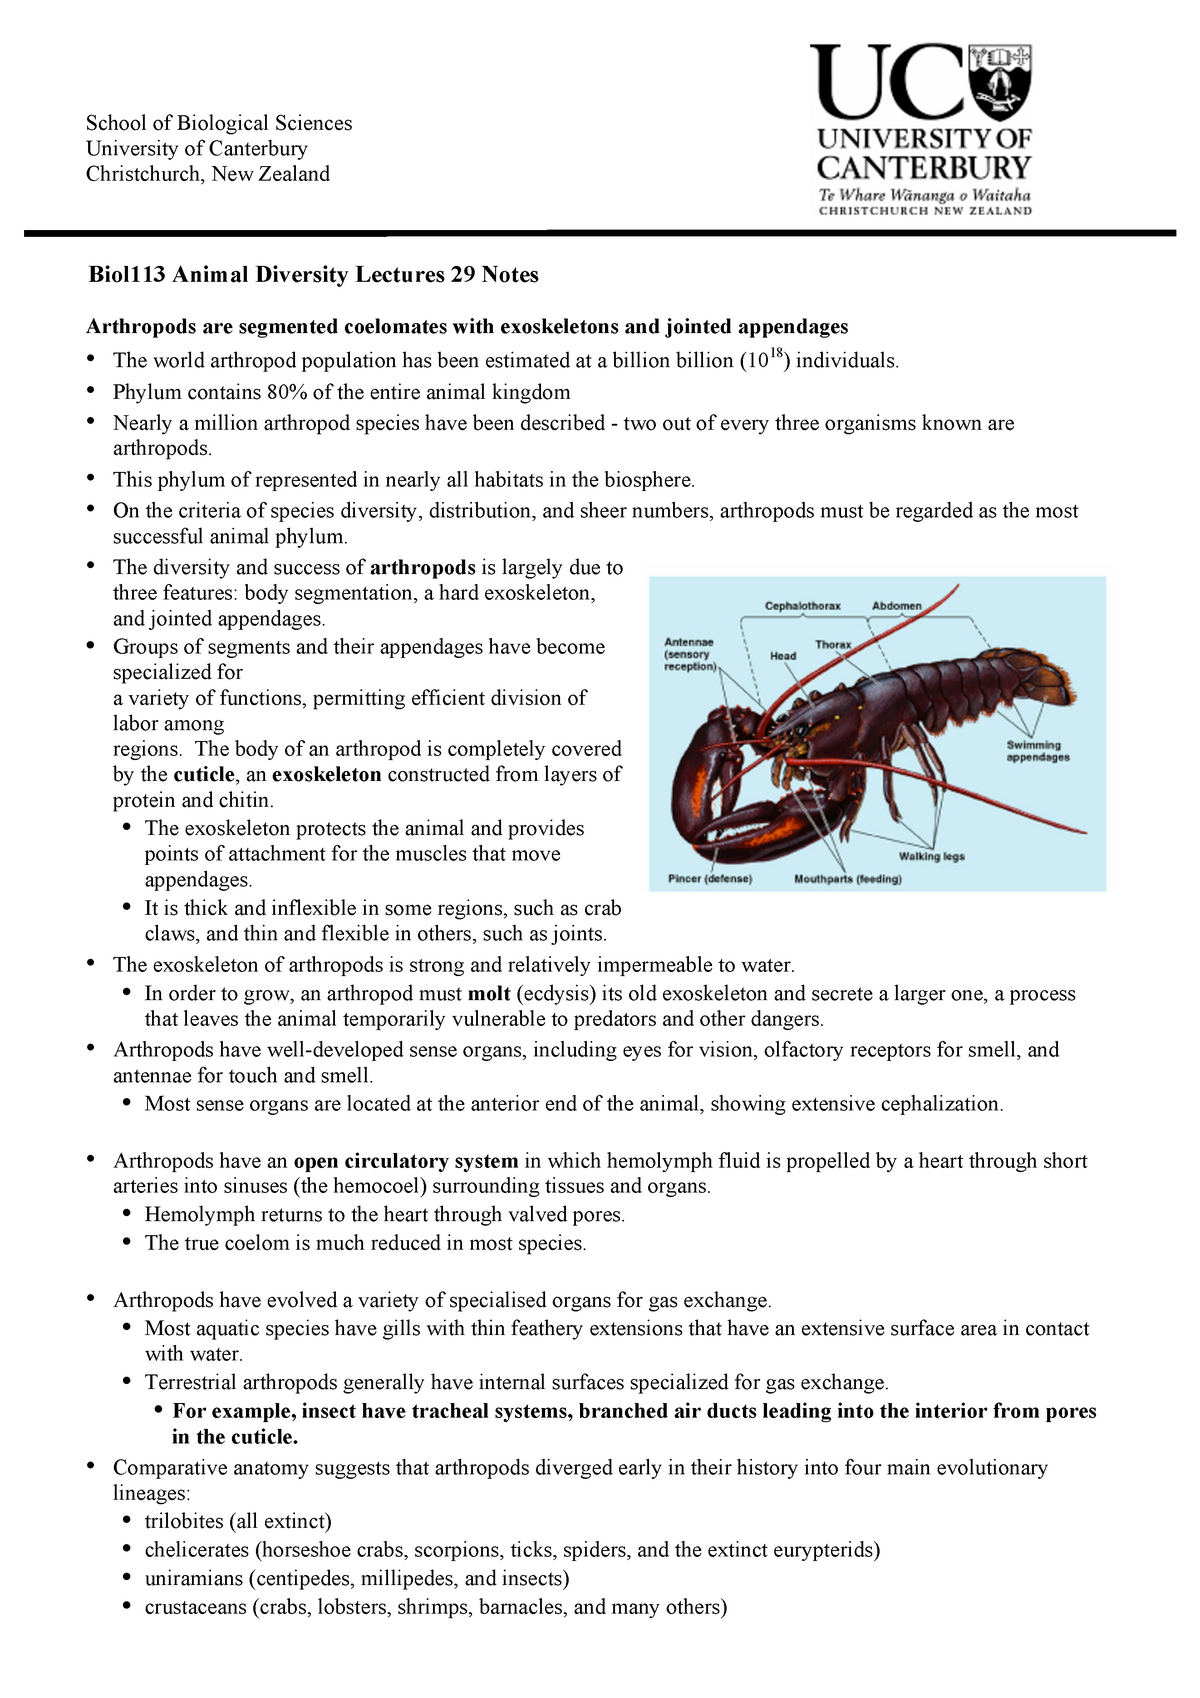 Arthropod lecture notes - Biol113 Animal Diversity Lectures 29 Notes  Arthropods are segmented - Studocu